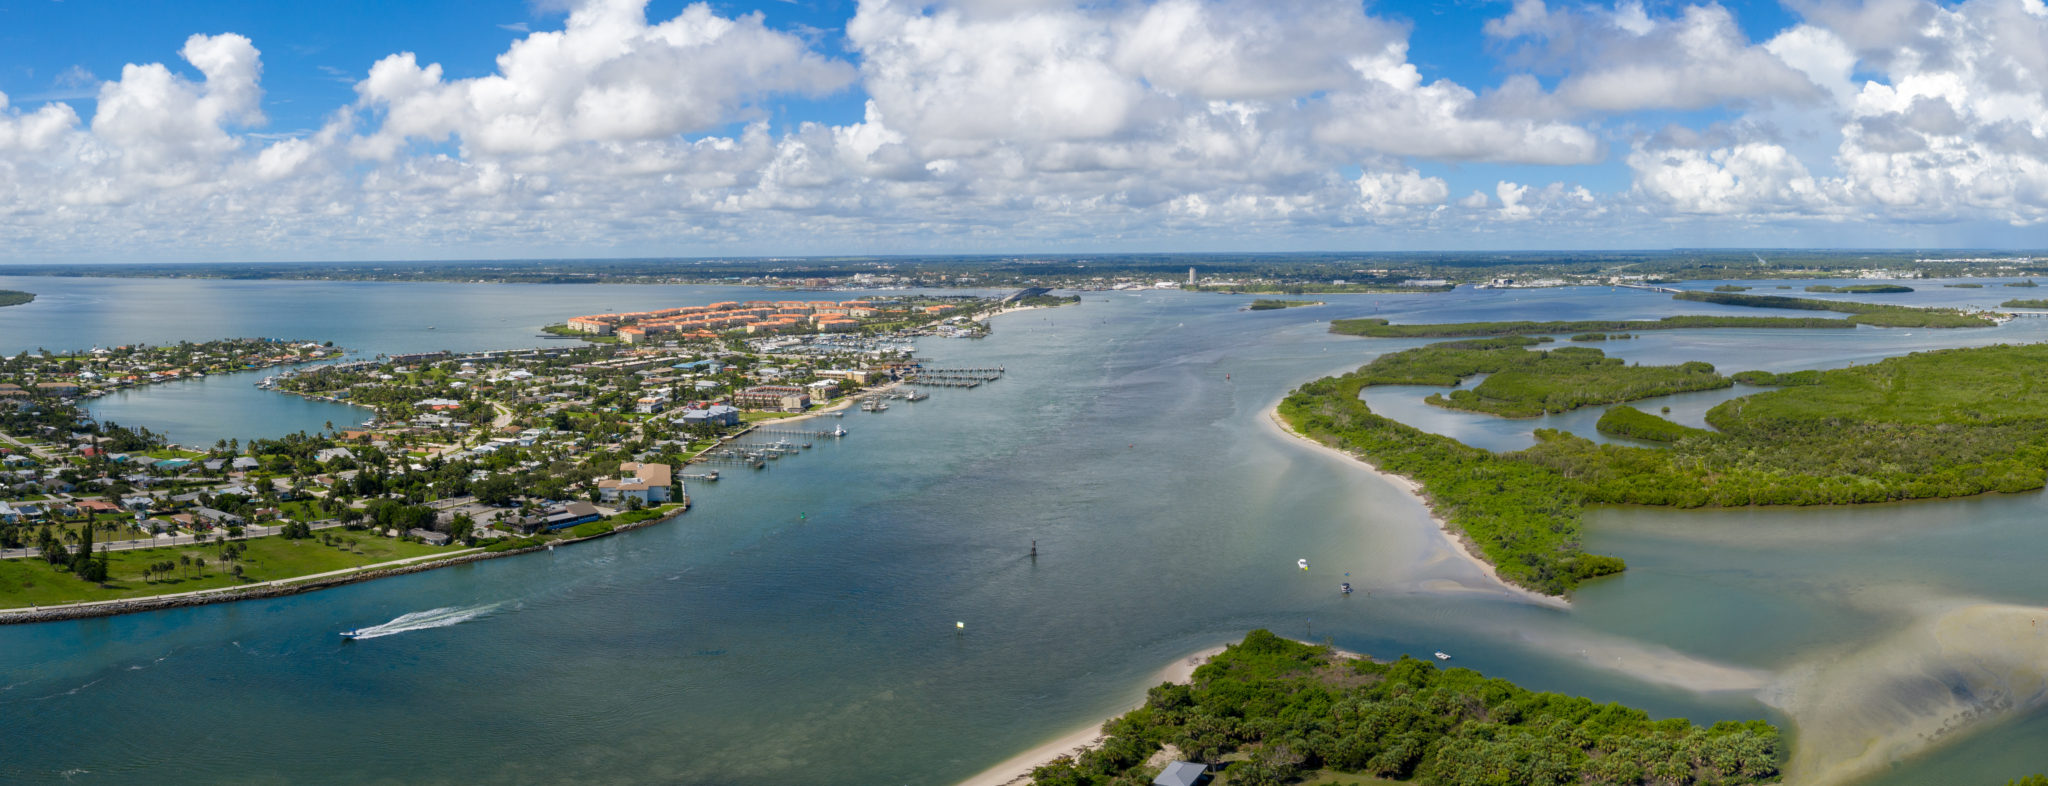 Fort Pierce has an inlet to the Atlantic Ocean that allows boats to come and go from the ocean.